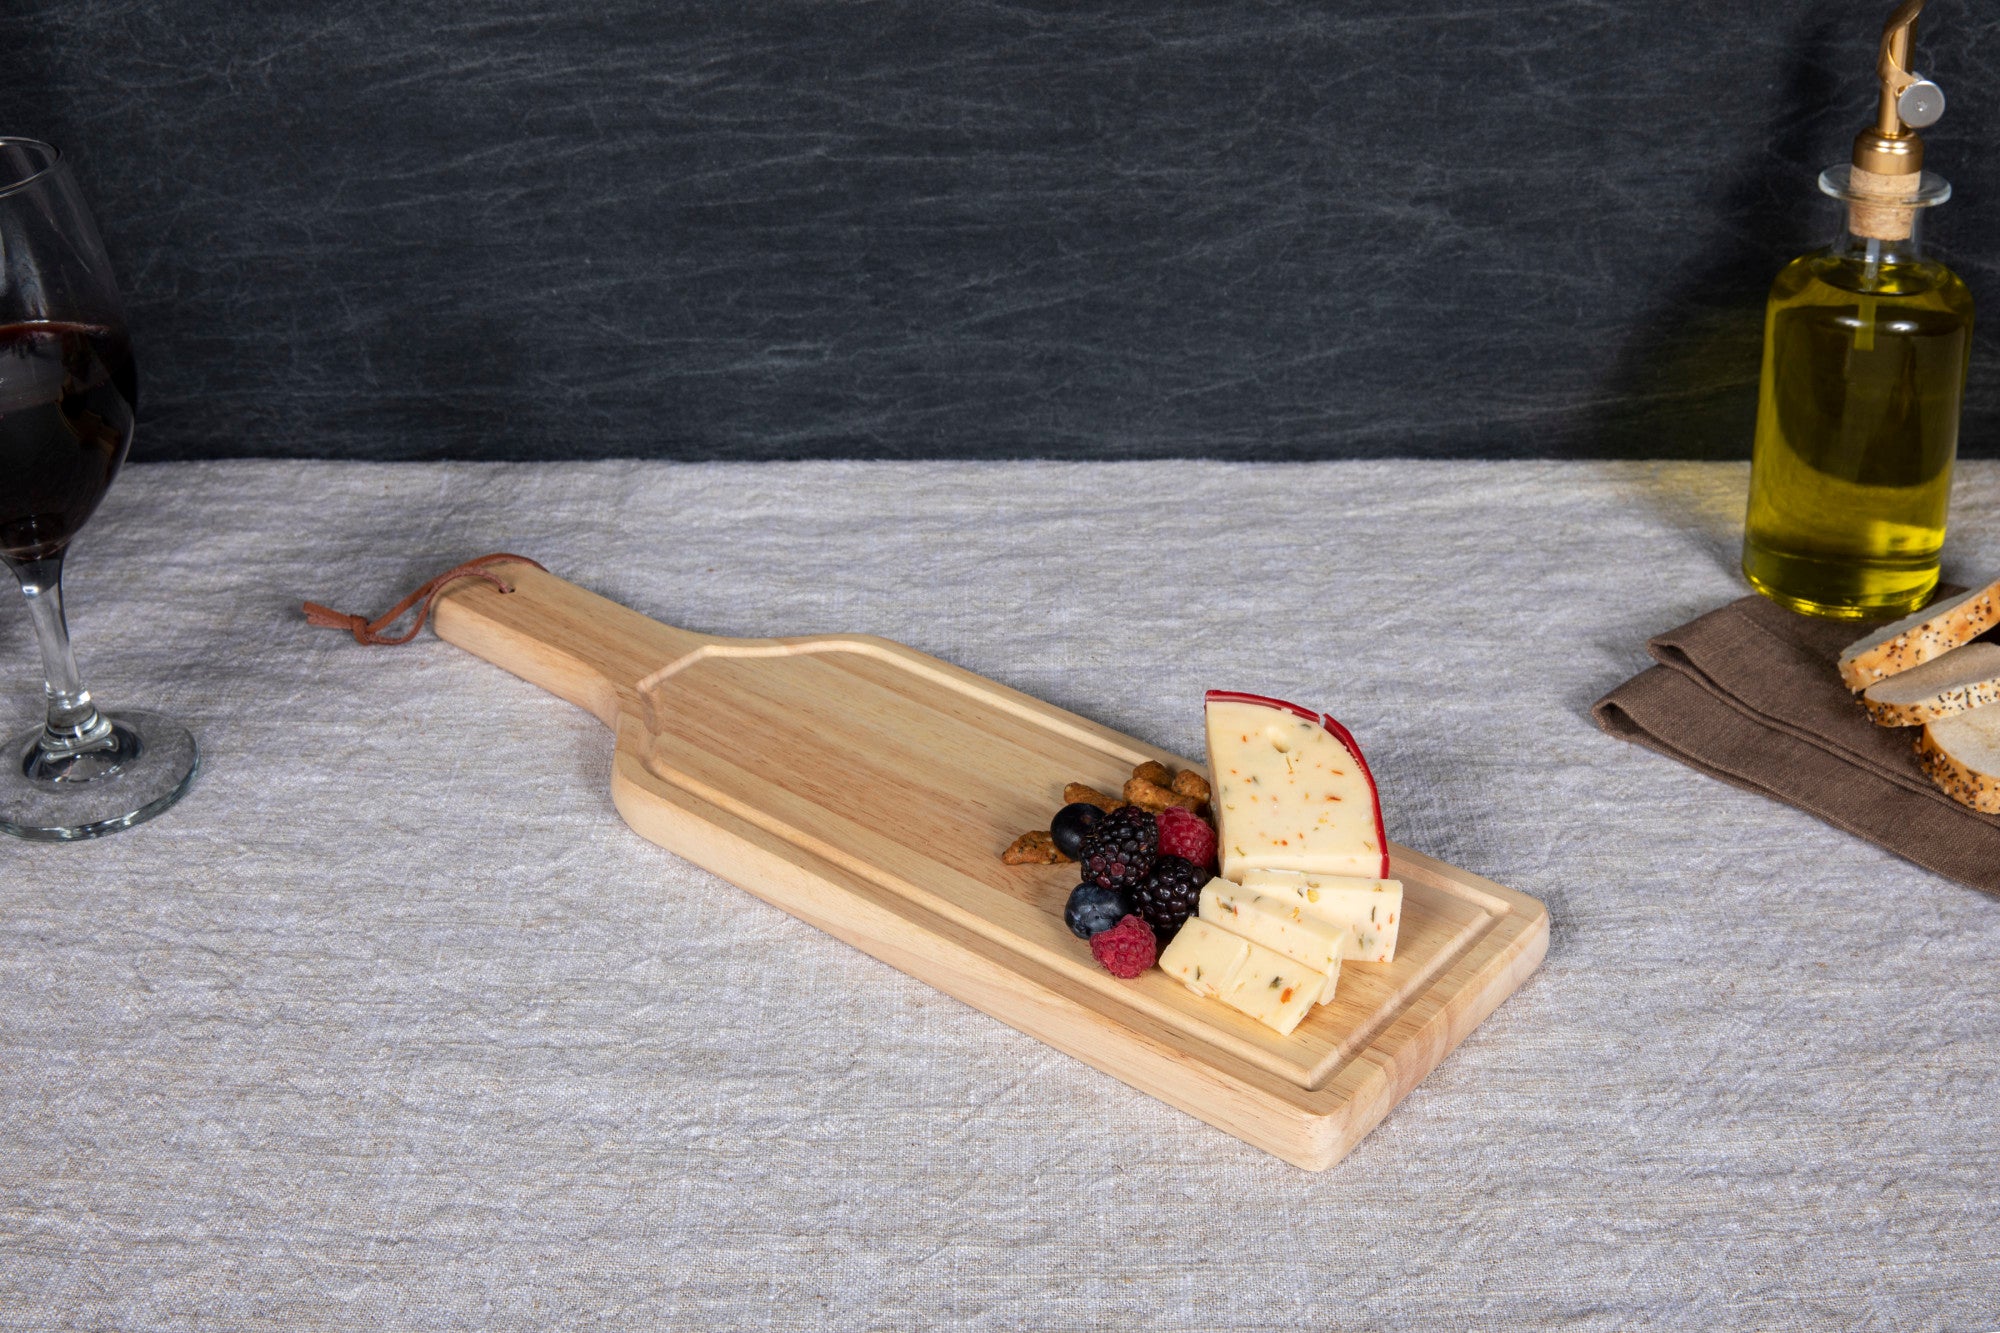 Los Angeles Dodgers - Botella Cheese Cutting Board & Serving Tray